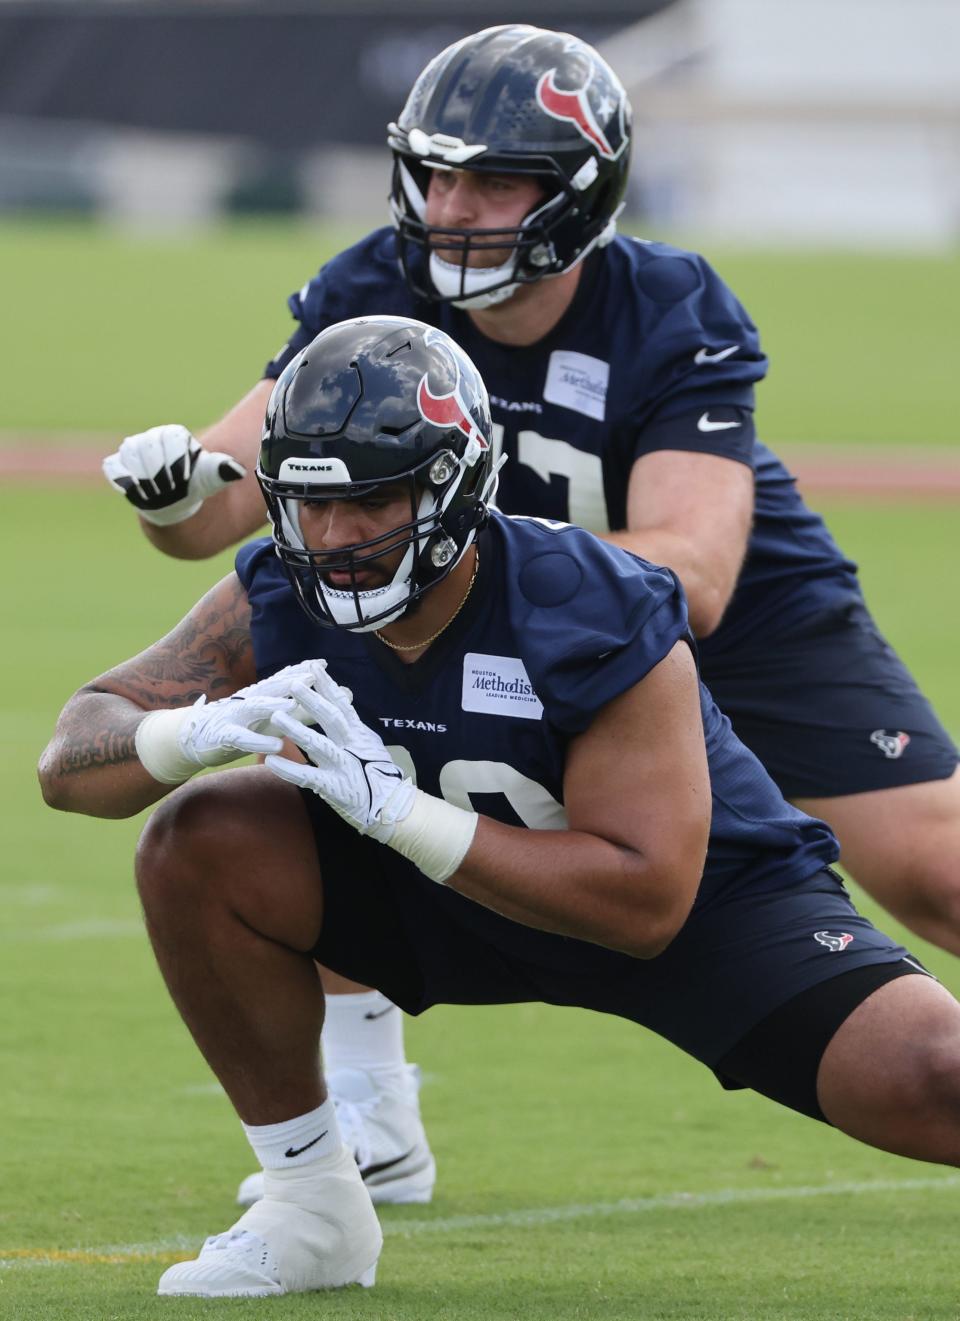 Cathedral Prep graduate Frederick "Juice" Scruggs stretches during this year's Houston Texans rookie camp. Houston picked Scruggs, a Penn State University offensive lineman, in the second round of April's NFL draft. Scruggs suffered a hamstring pull in the Texans' last preseason game. He was finally cleared to play and appeared in his first game when Houston hosted Jacksonville last Sunday.